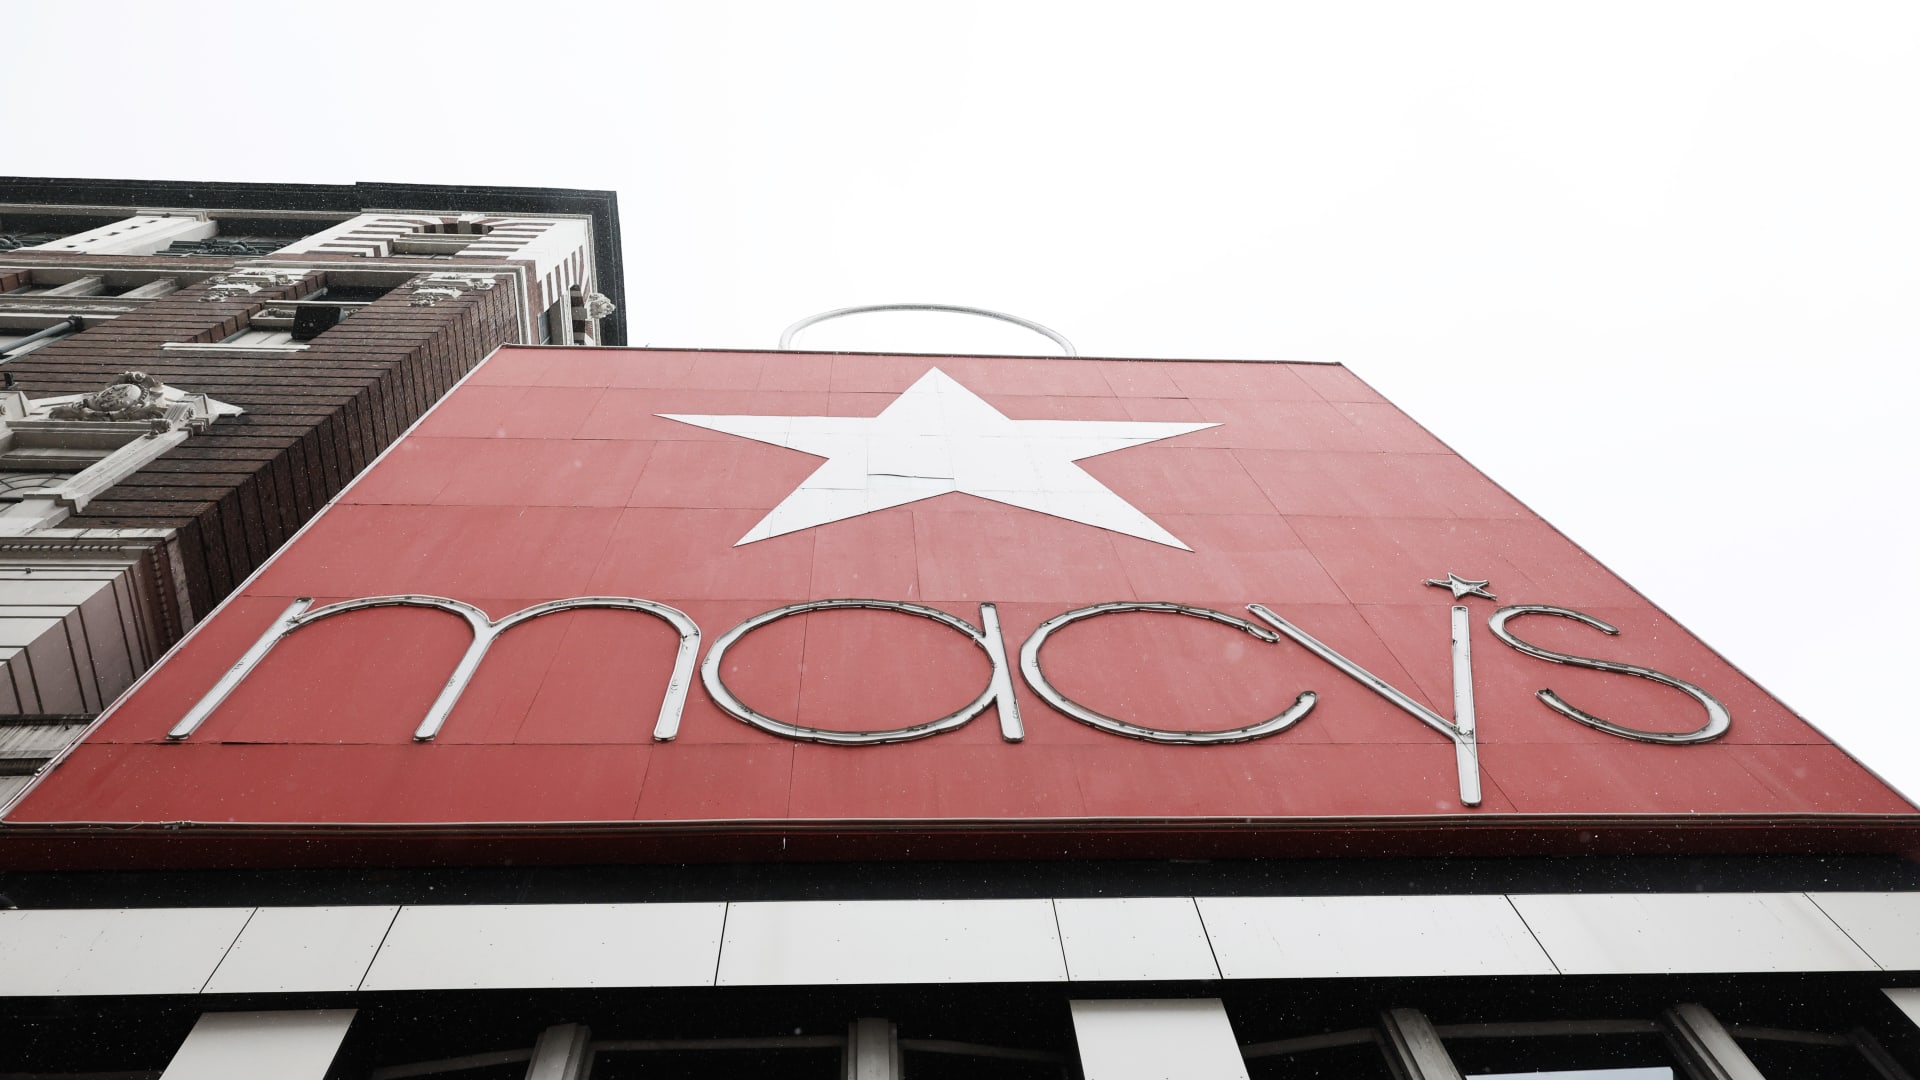 Organized retail theft ring that focused Macy’s, different retailers is charged in New York